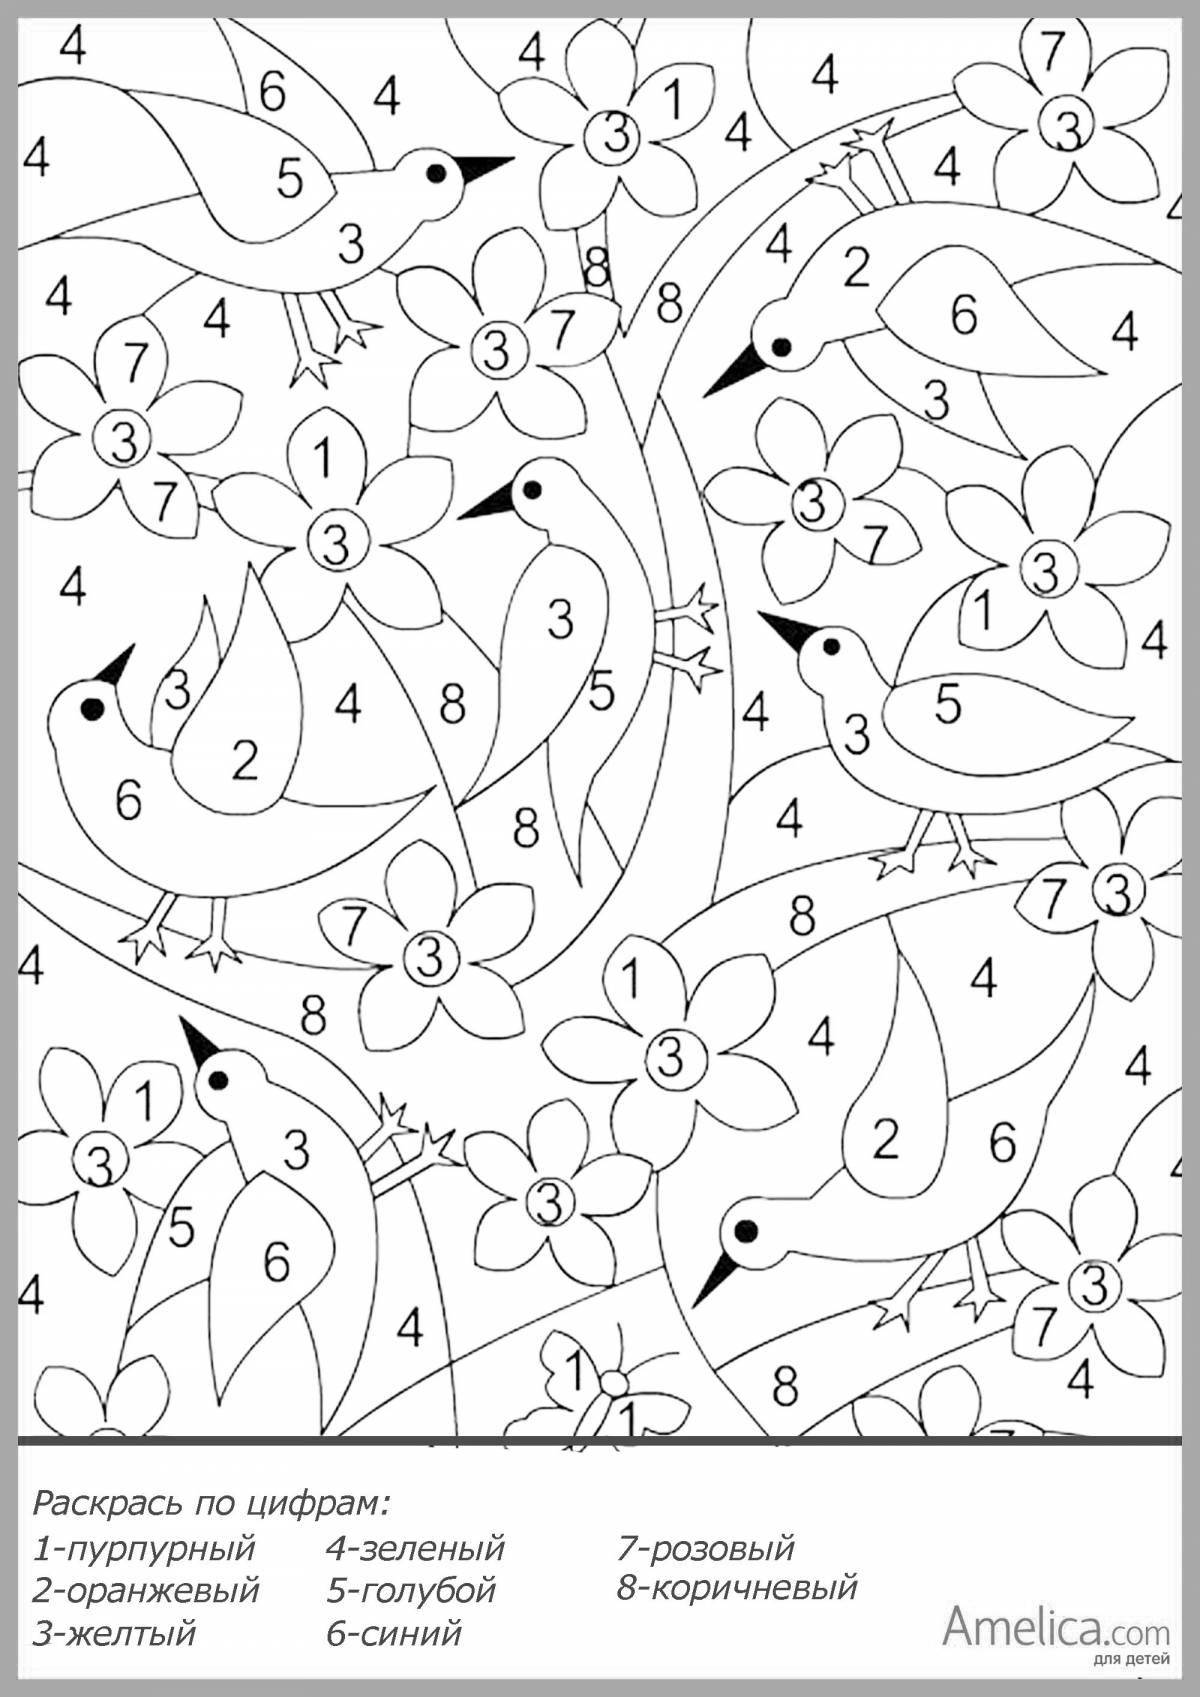 Digital coloring book for children 6-7 years old